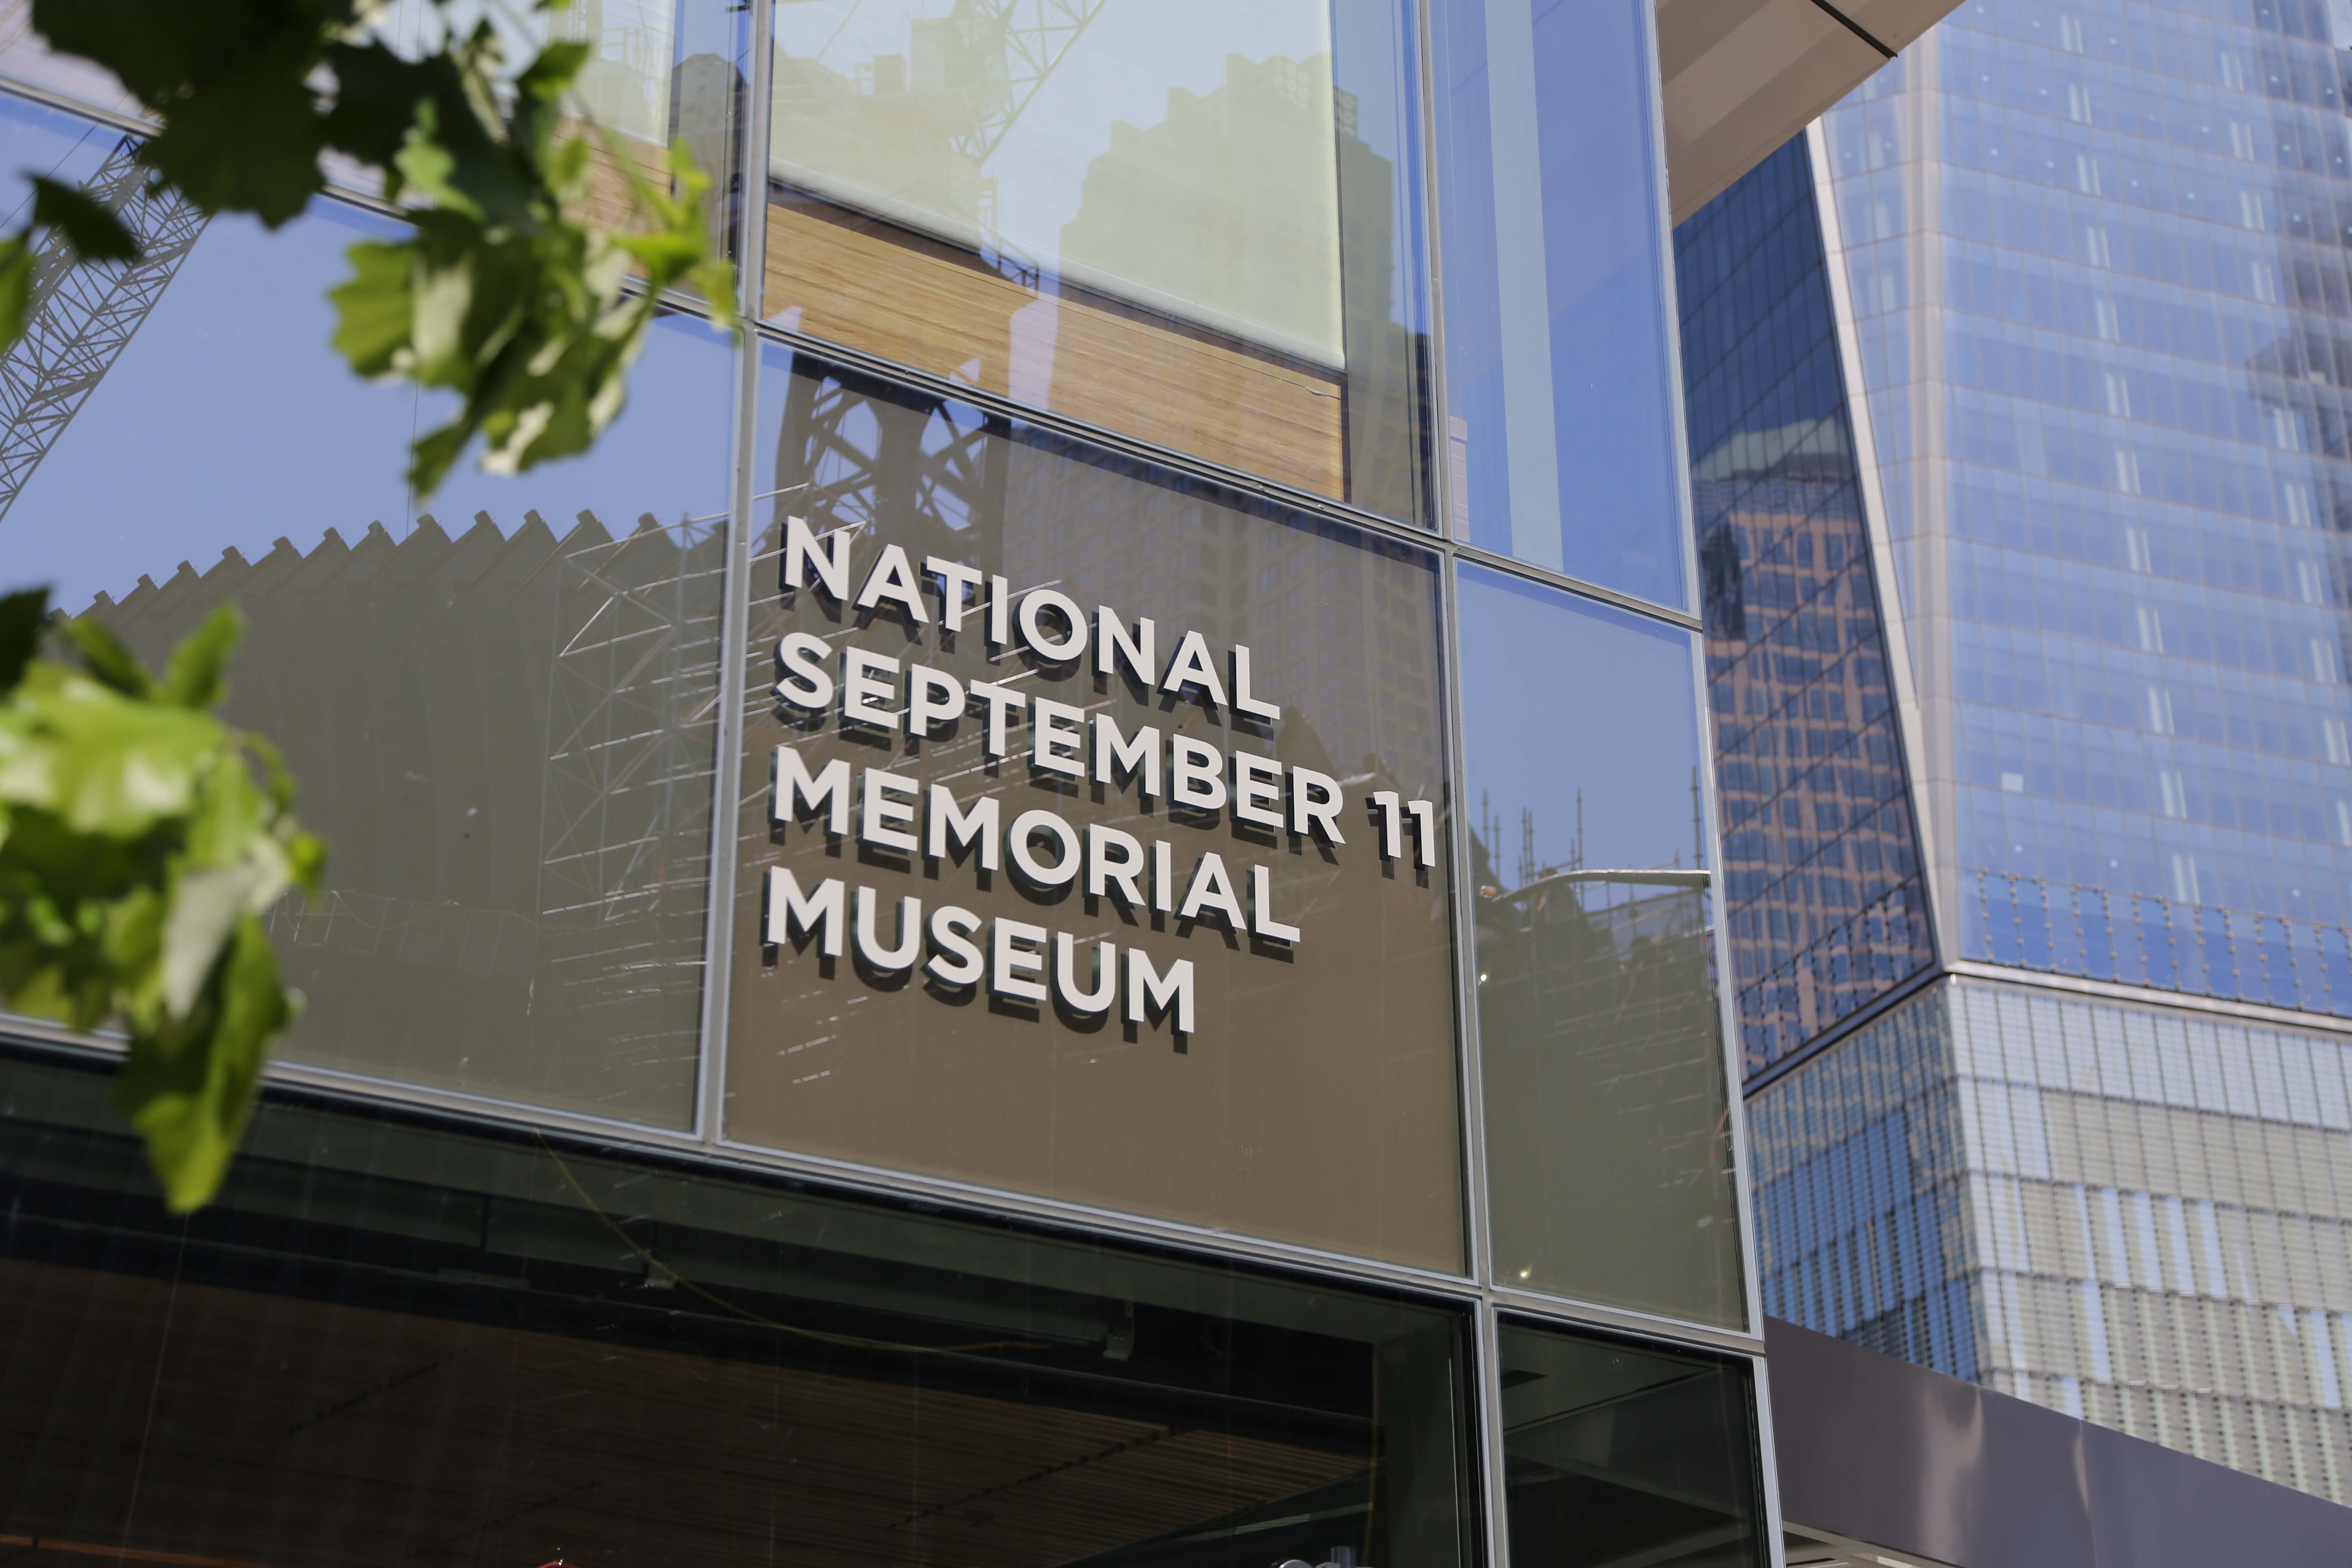 The entrance sign of the 9/11 Memorial Museum is displayed on the Museum’s glass facade. It reads “National September 11 Memorial Museum. One World Trade Center is visible in the background.